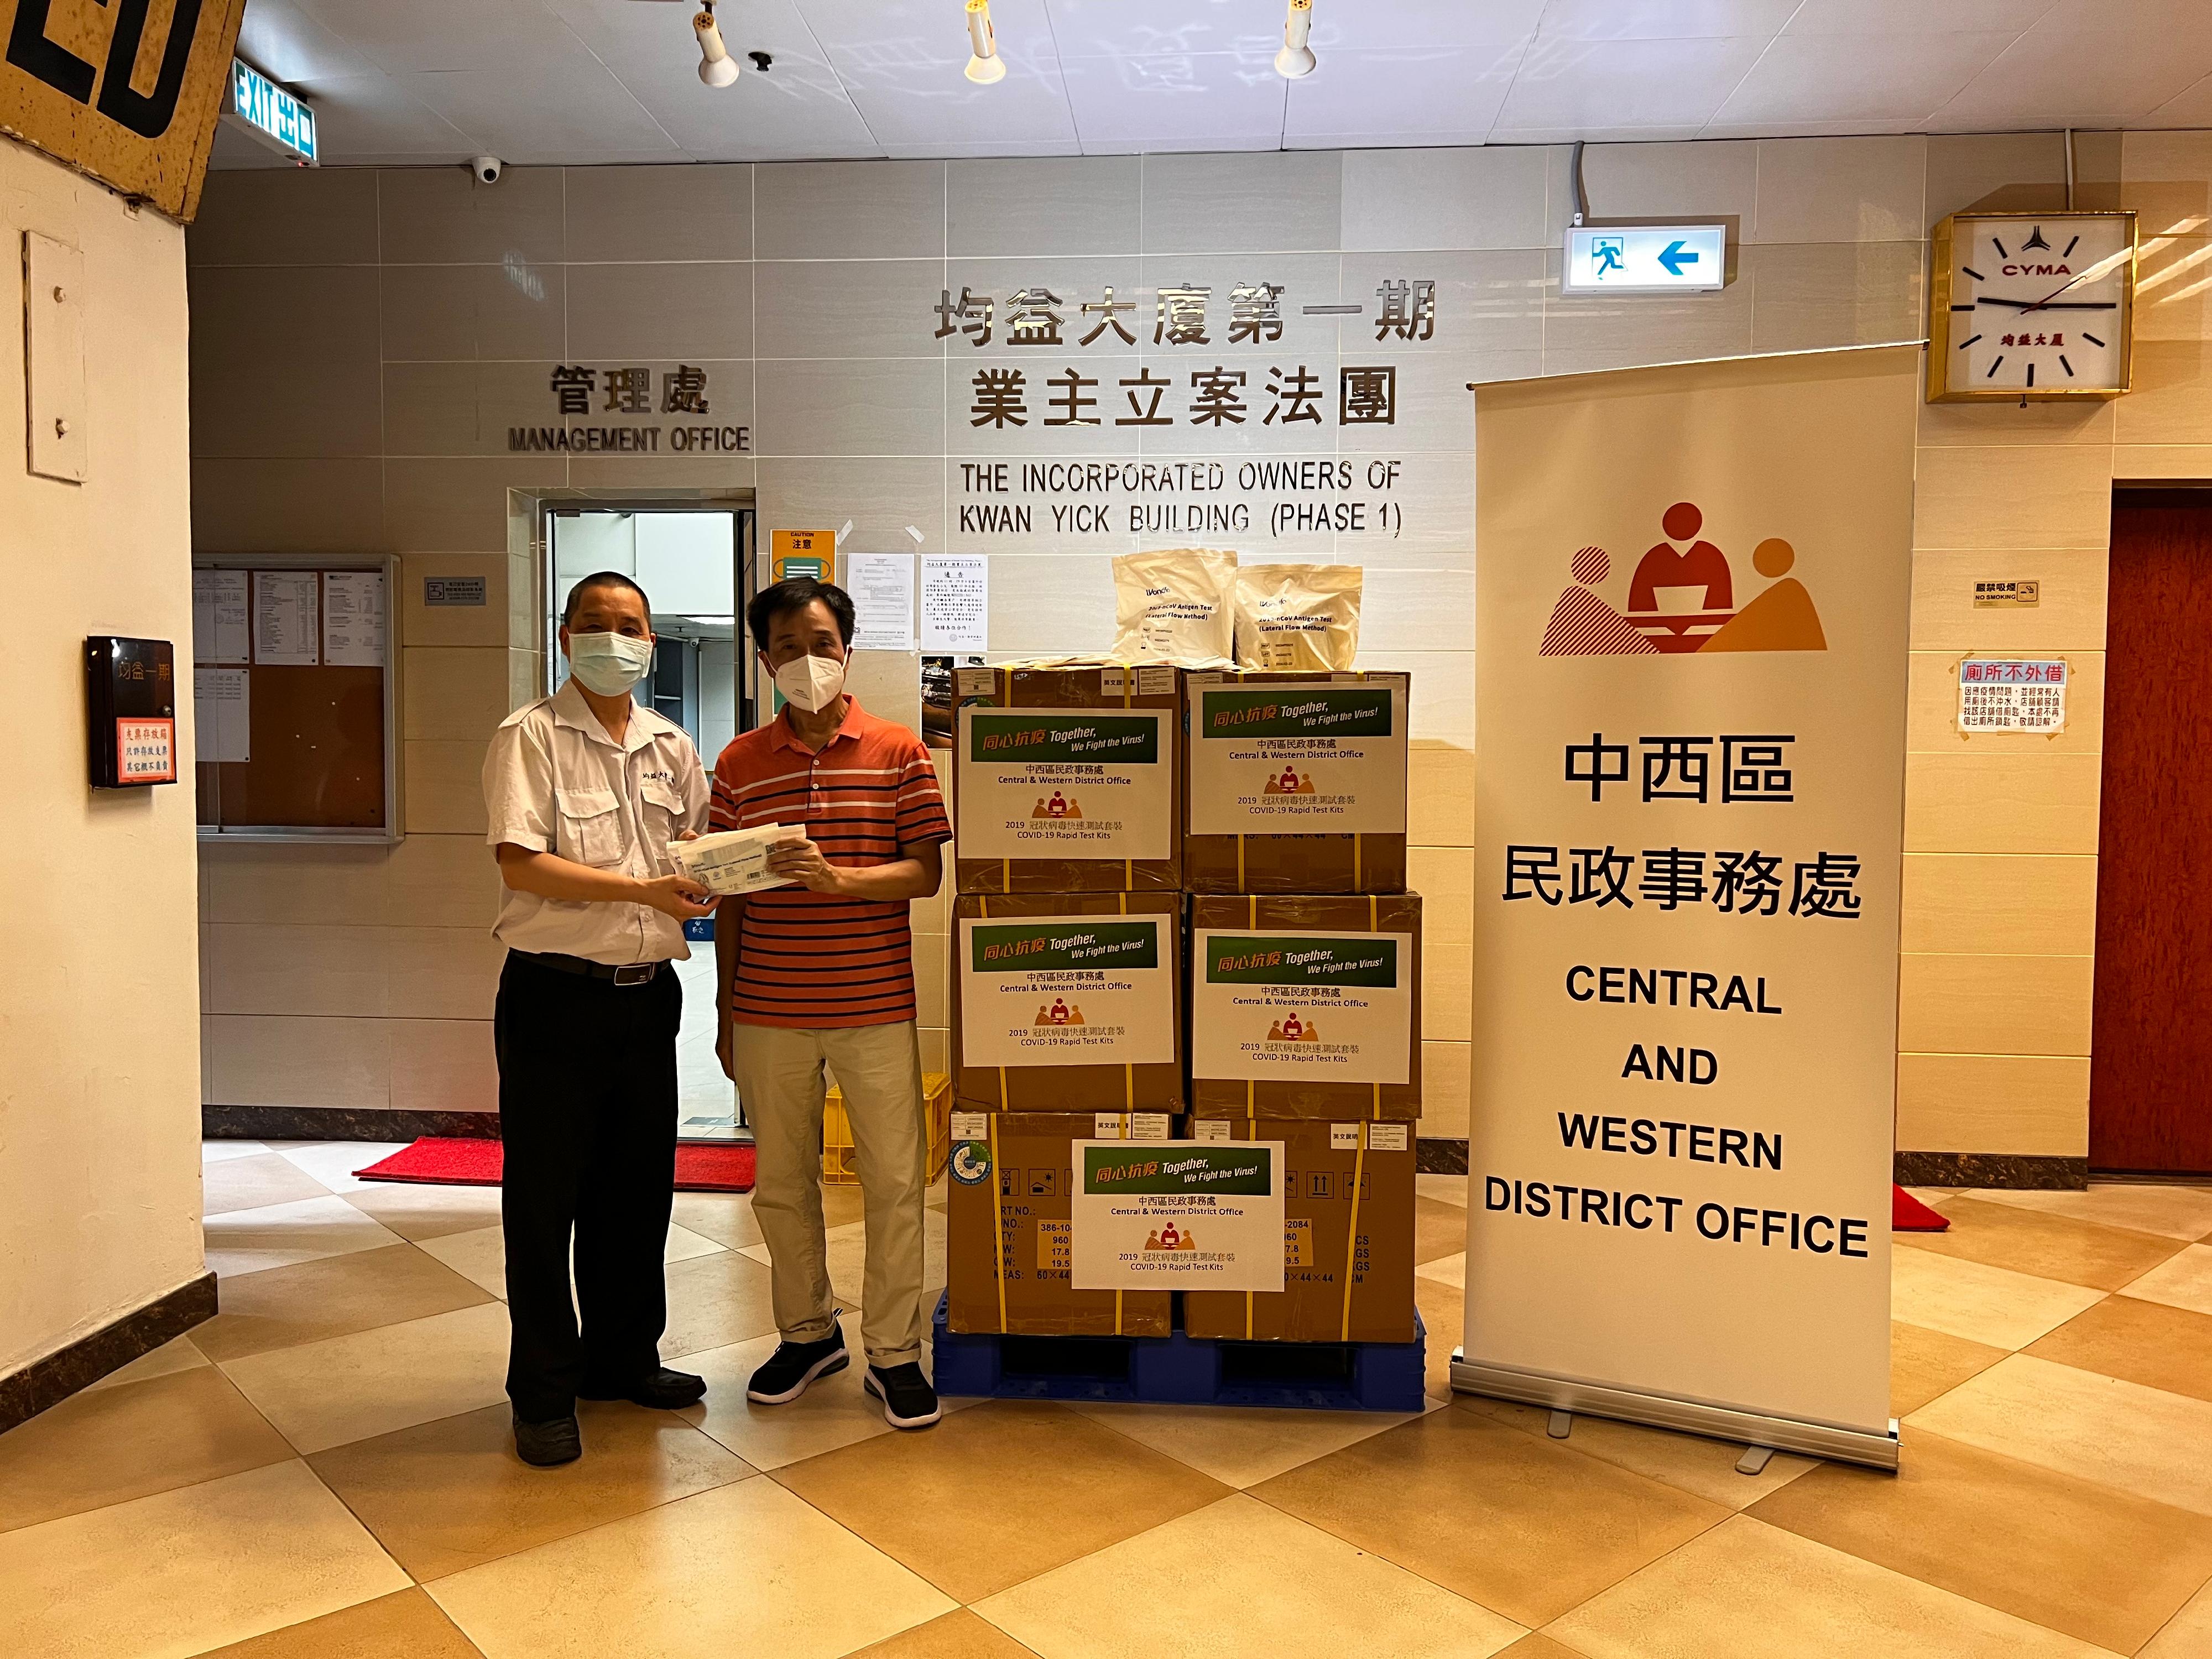 The Central and Western District Office today (July 20) distributed COVID-19 rapid test kits to households, cleansing workers and property management staff living and working in Kwan Yick Building (Phase I) for voluntary testing through the property management company.